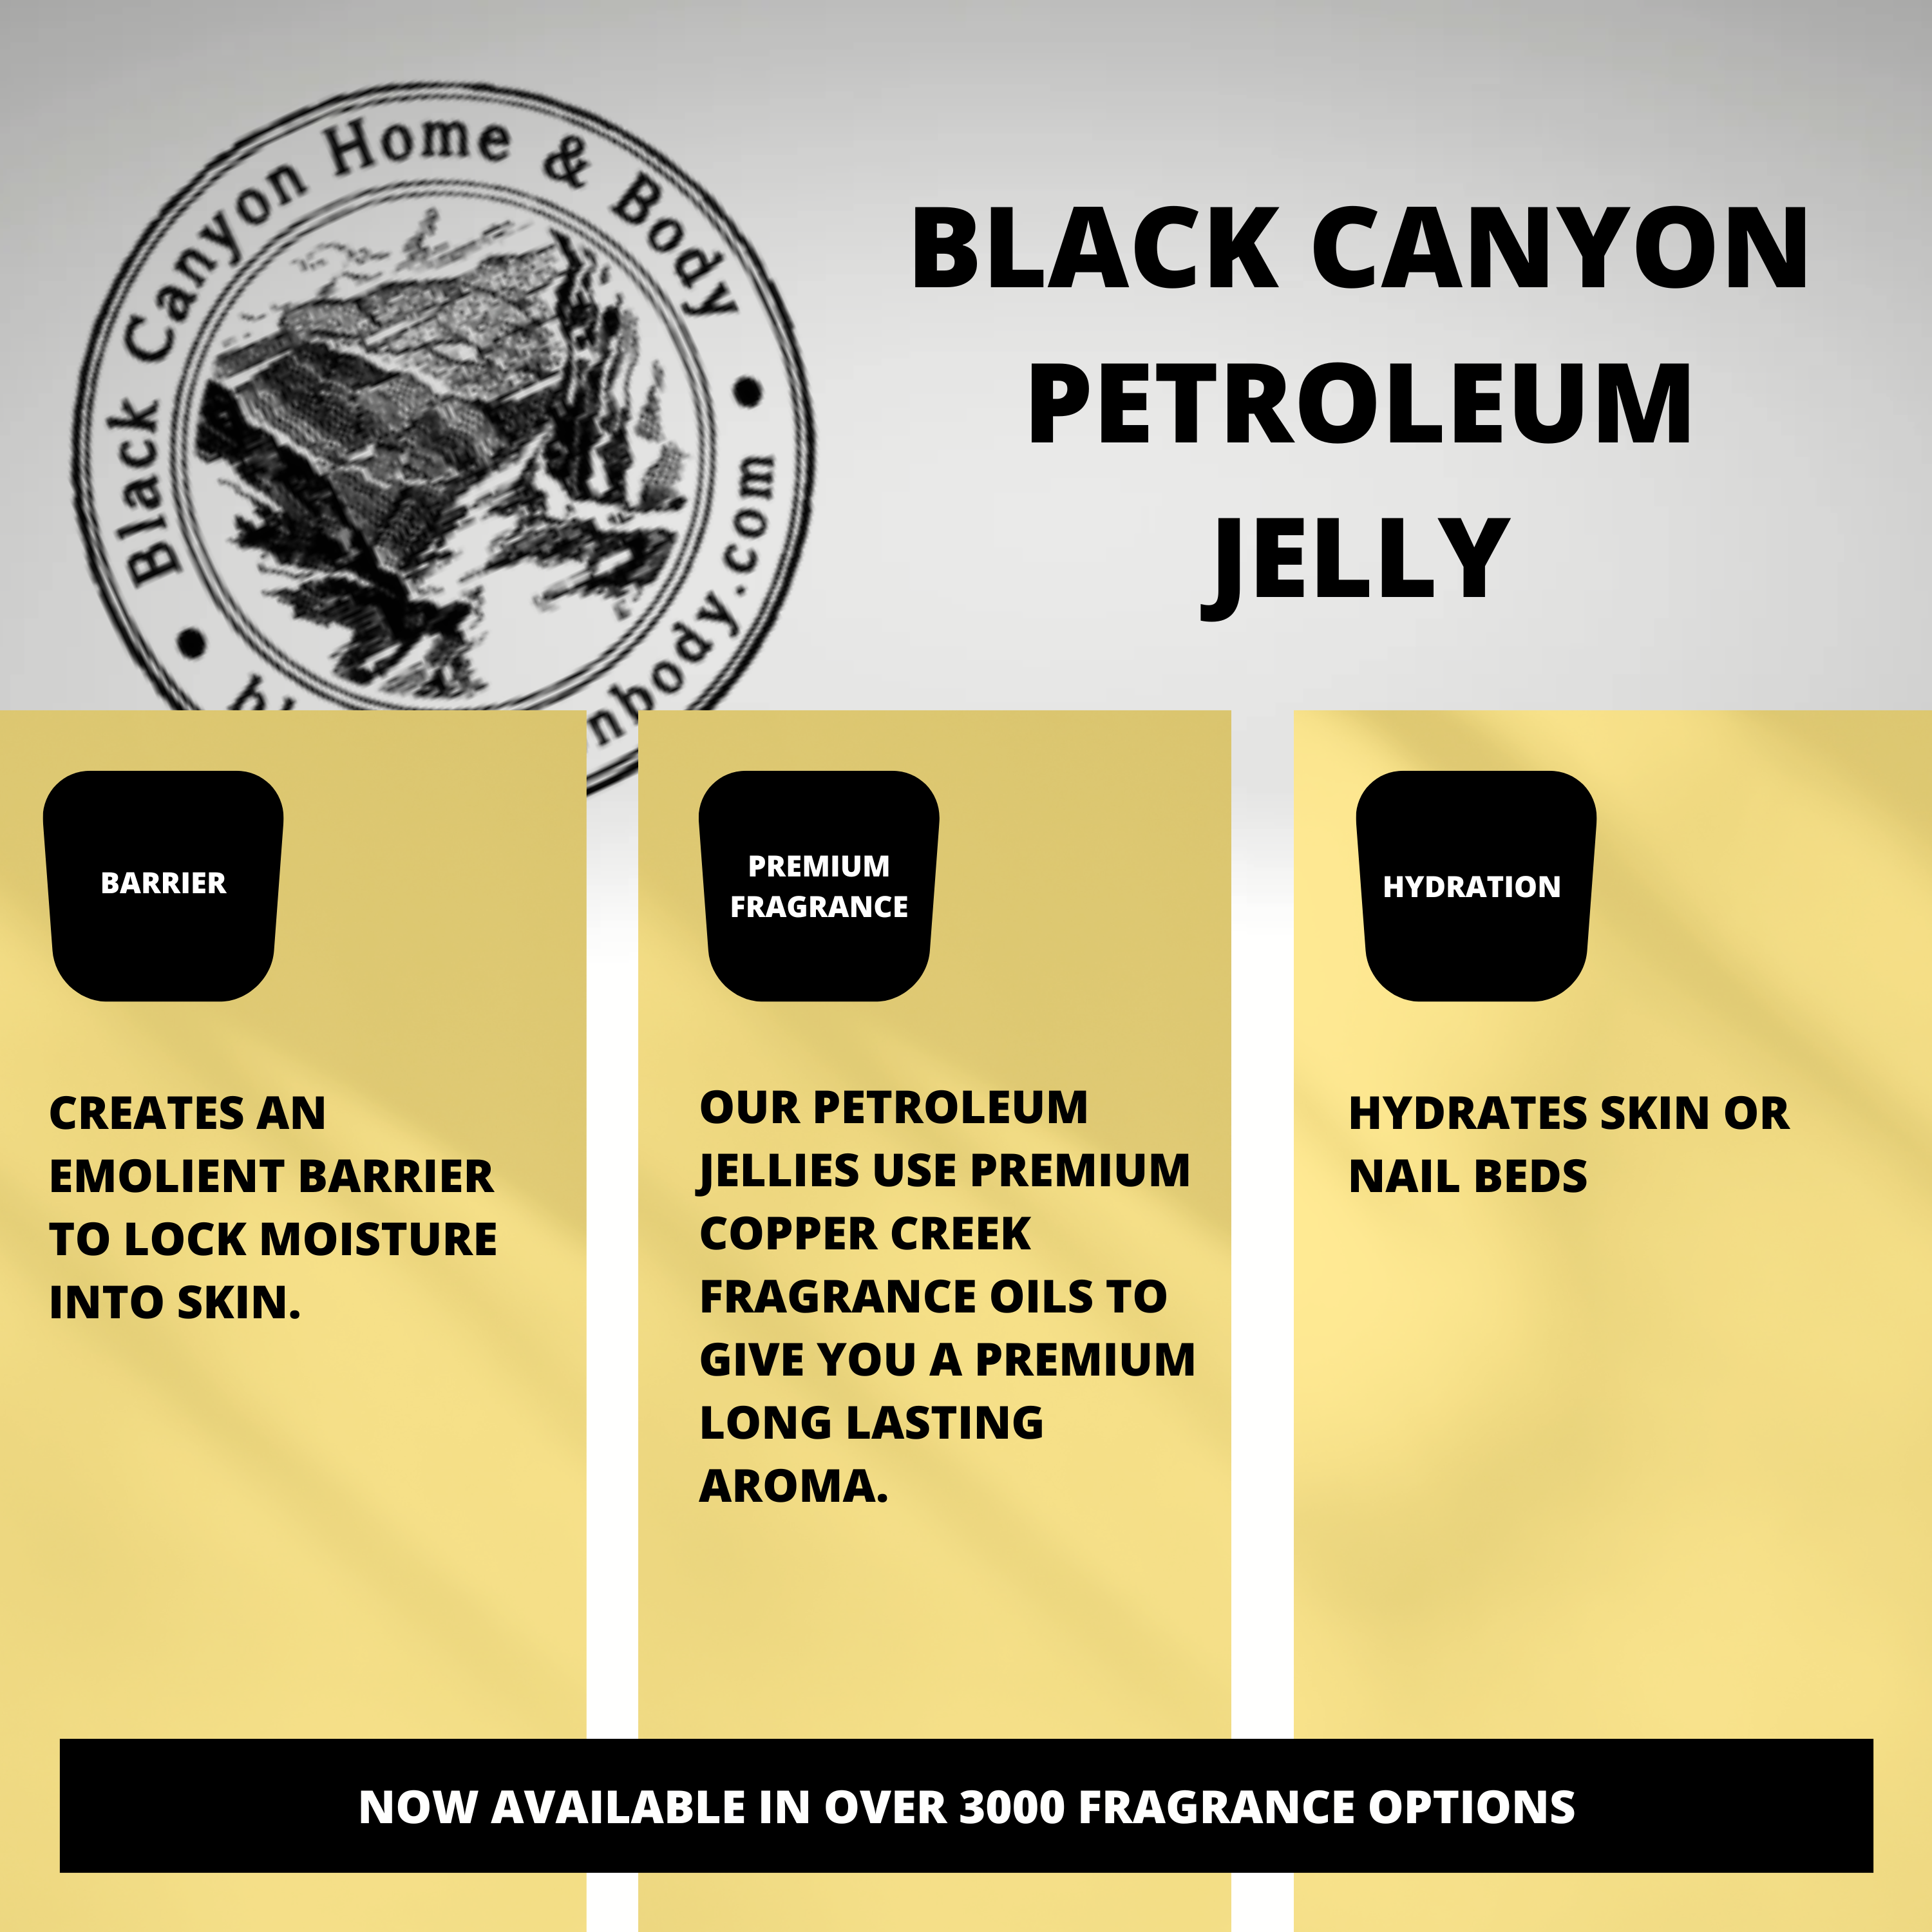 Black Canyon Apples & Oranges Scented Petroleum Jelly